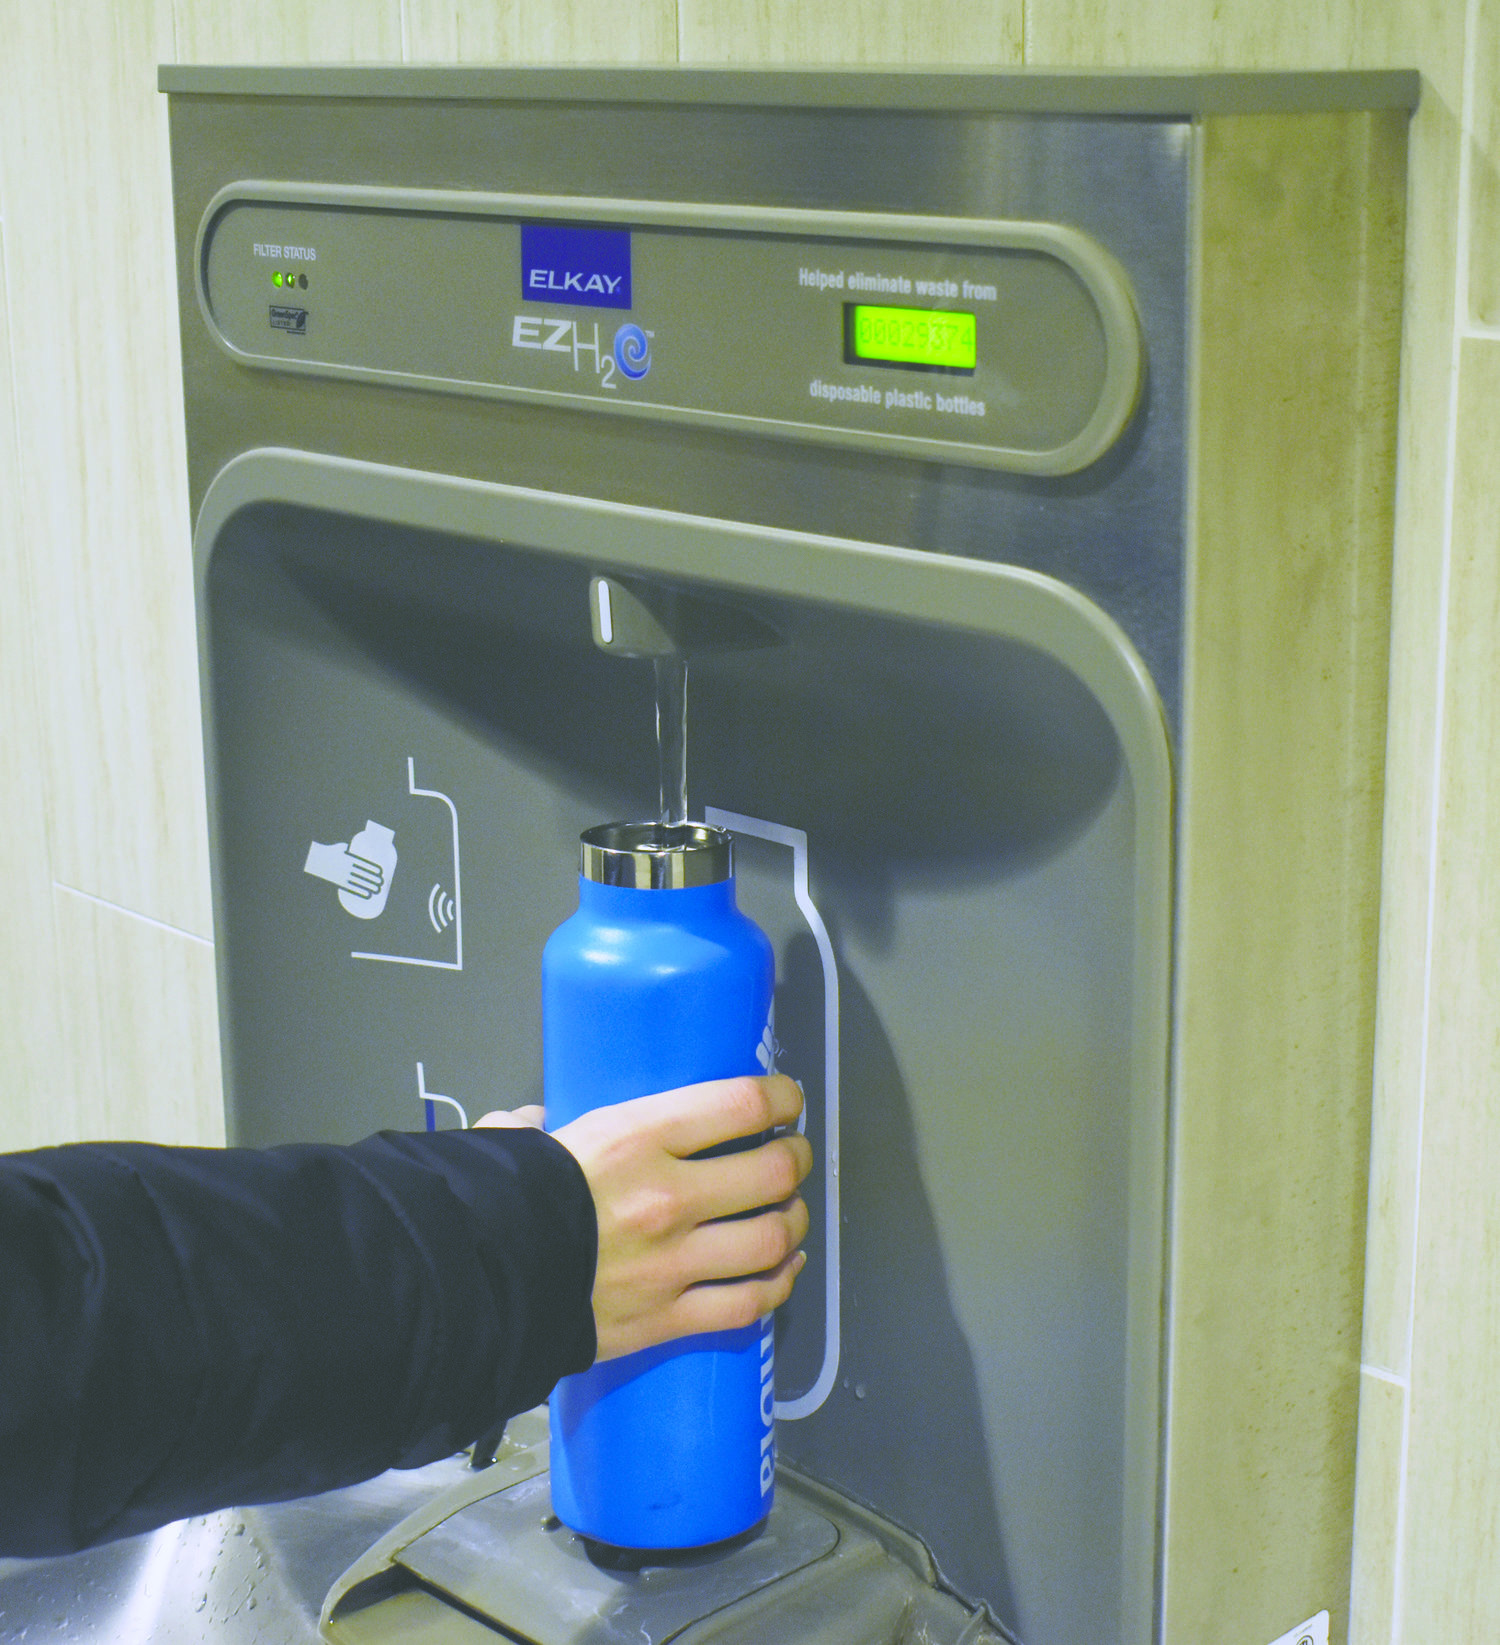 New guideline promotes water refilling stations — The Daily Campus - UConn Daily Campus